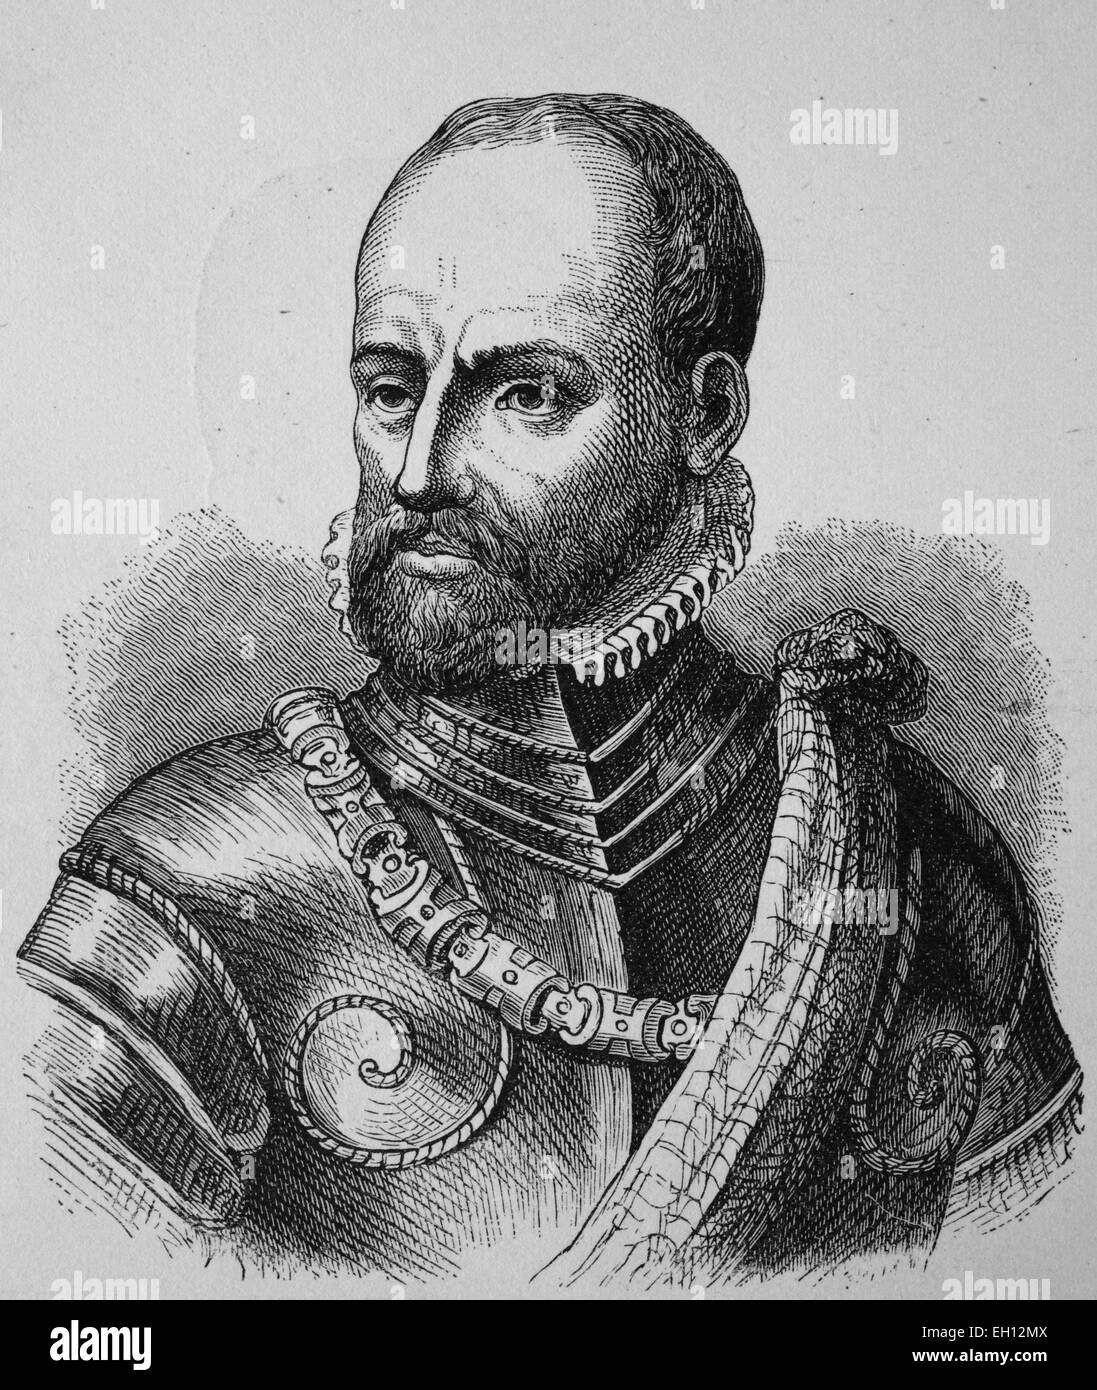 Philippe de Montmorency, Count of Horn, 1518 - 1568, Dutch admiral, freedom fighter, knight of the Order of the Golden Fleece, historical woodcut, 1880 Stock Photo